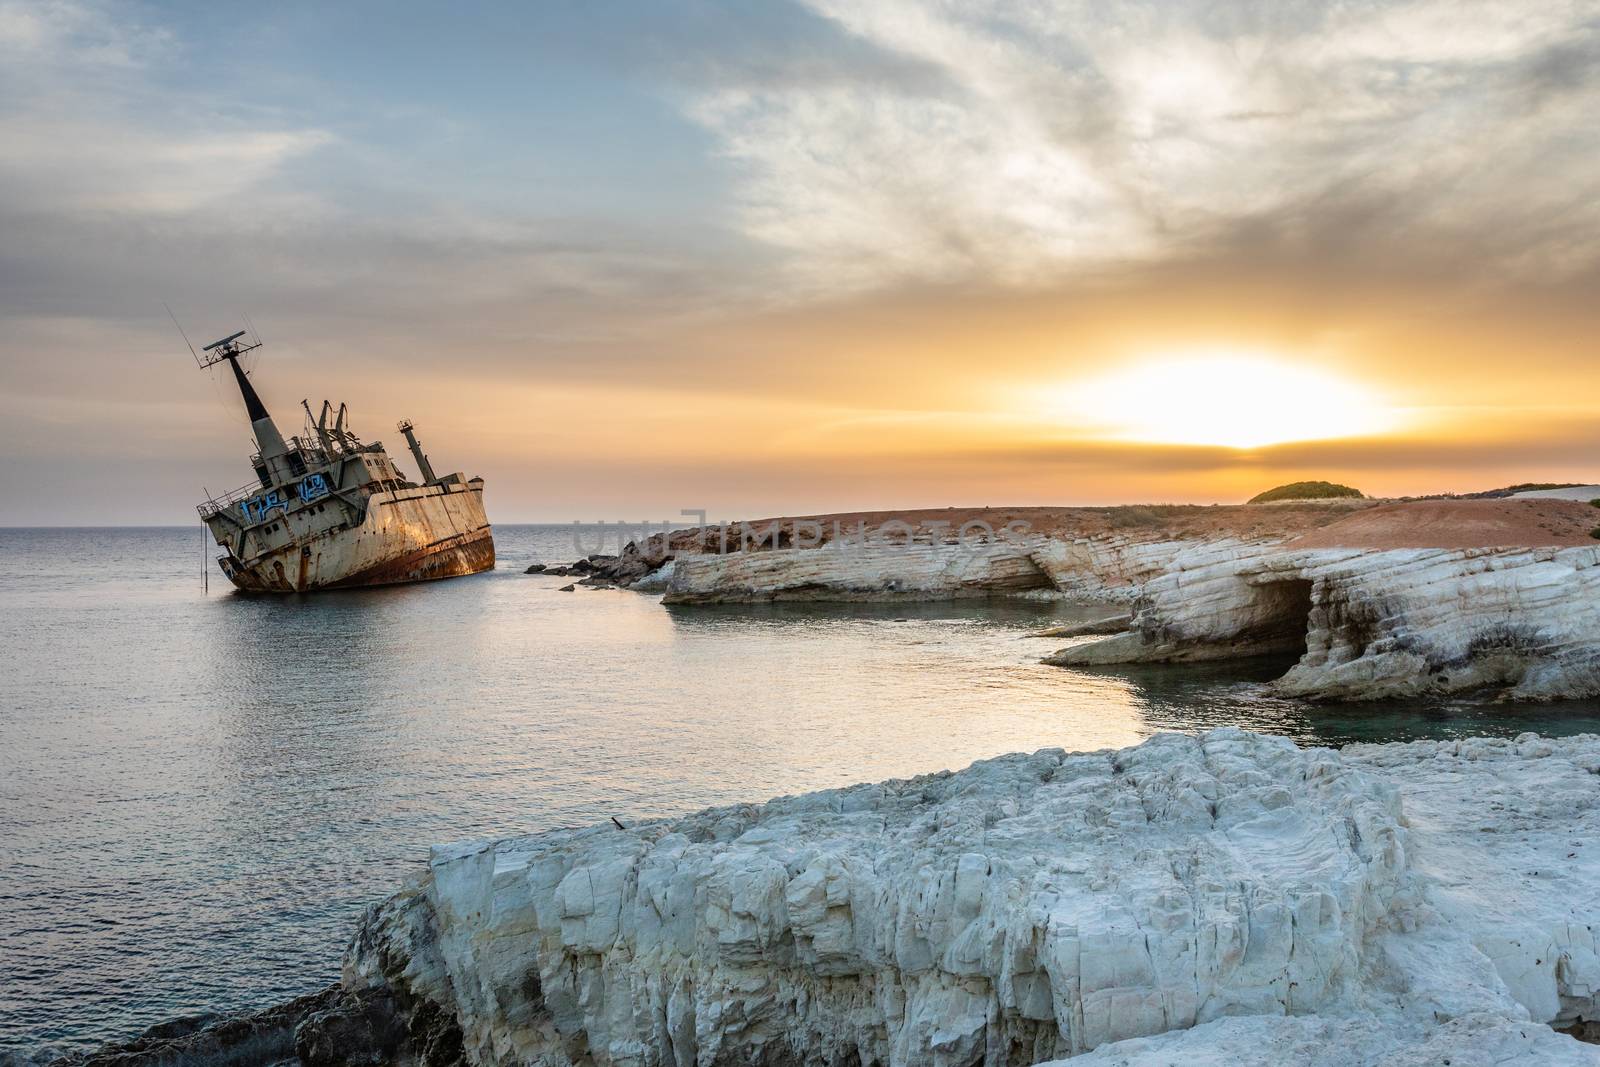 Abandoned rusty ship stranded ashore  in the sunset rays at Peyia village, Paphos